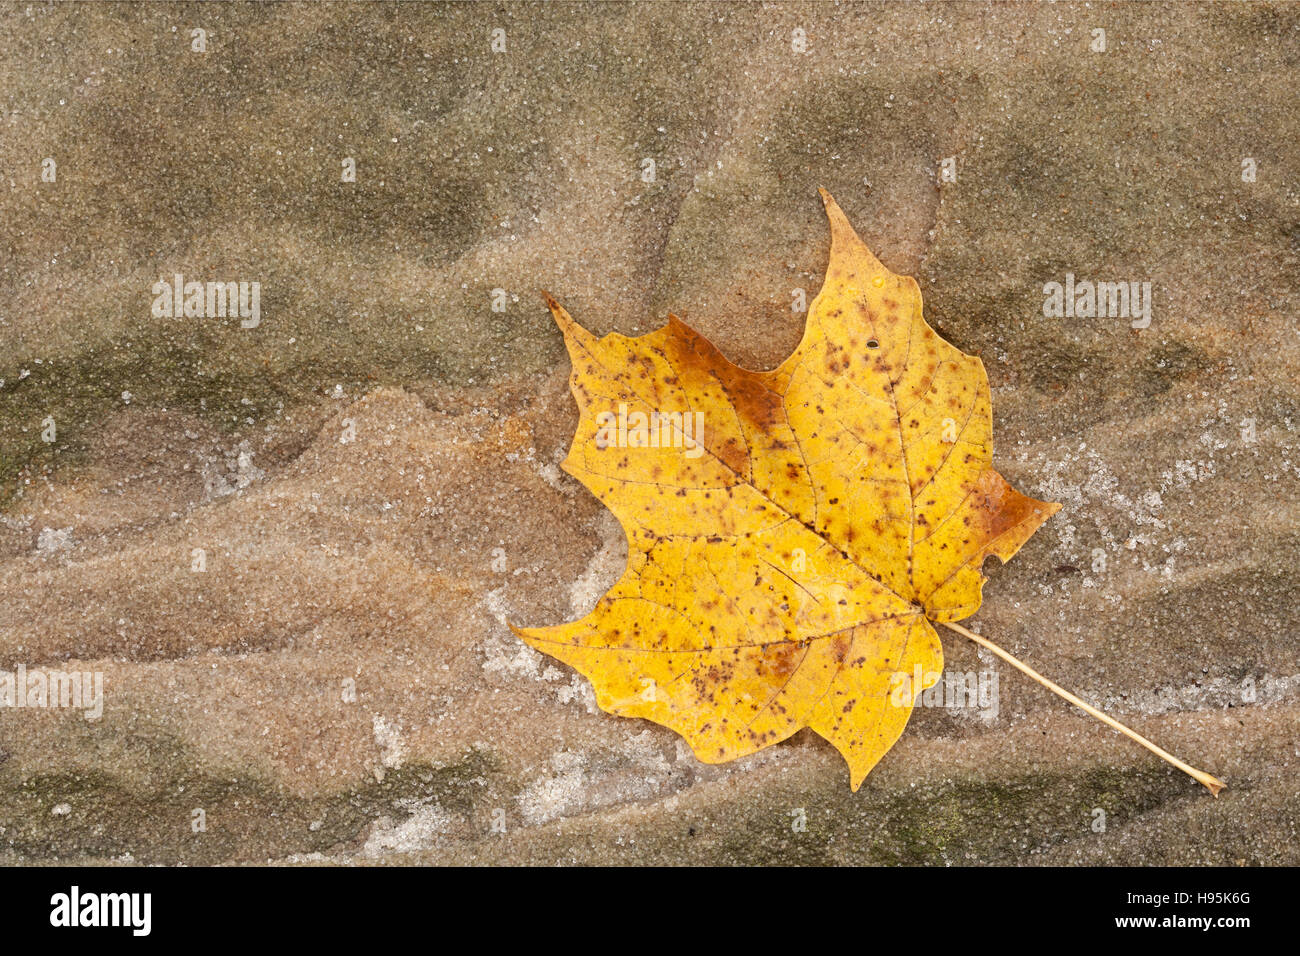 Glistening like small diamonds, the loose grains of a sandstone boulder surround an autumn maple leaf. Stock Photo